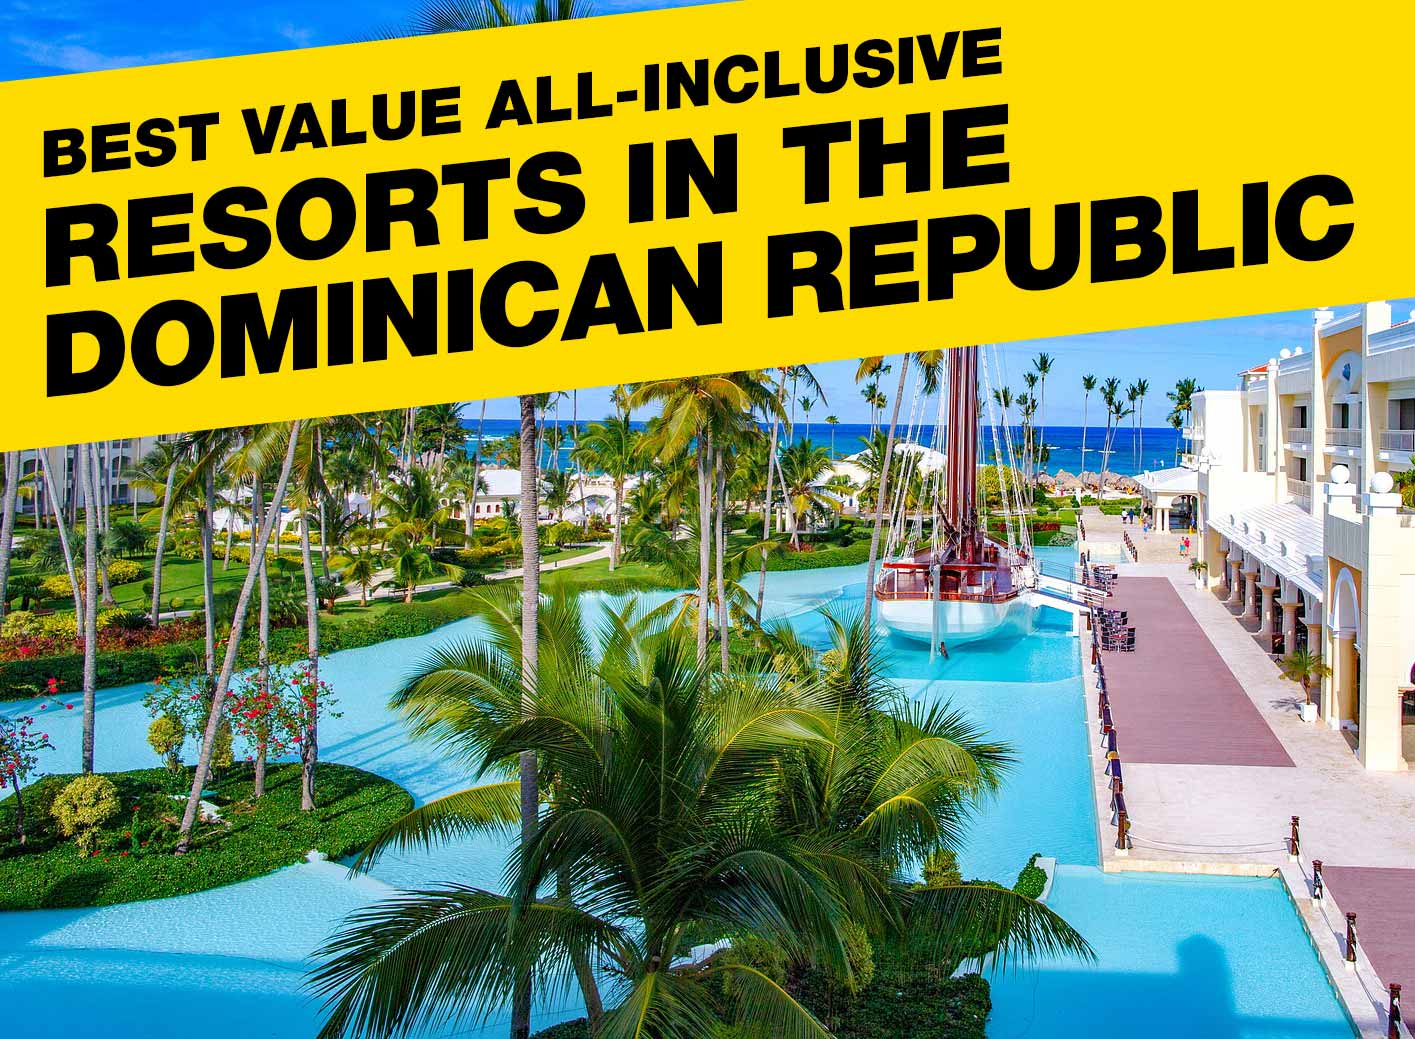 Best Value All-Inclusive Resorts in the Dominican Republic - PriceCapsule